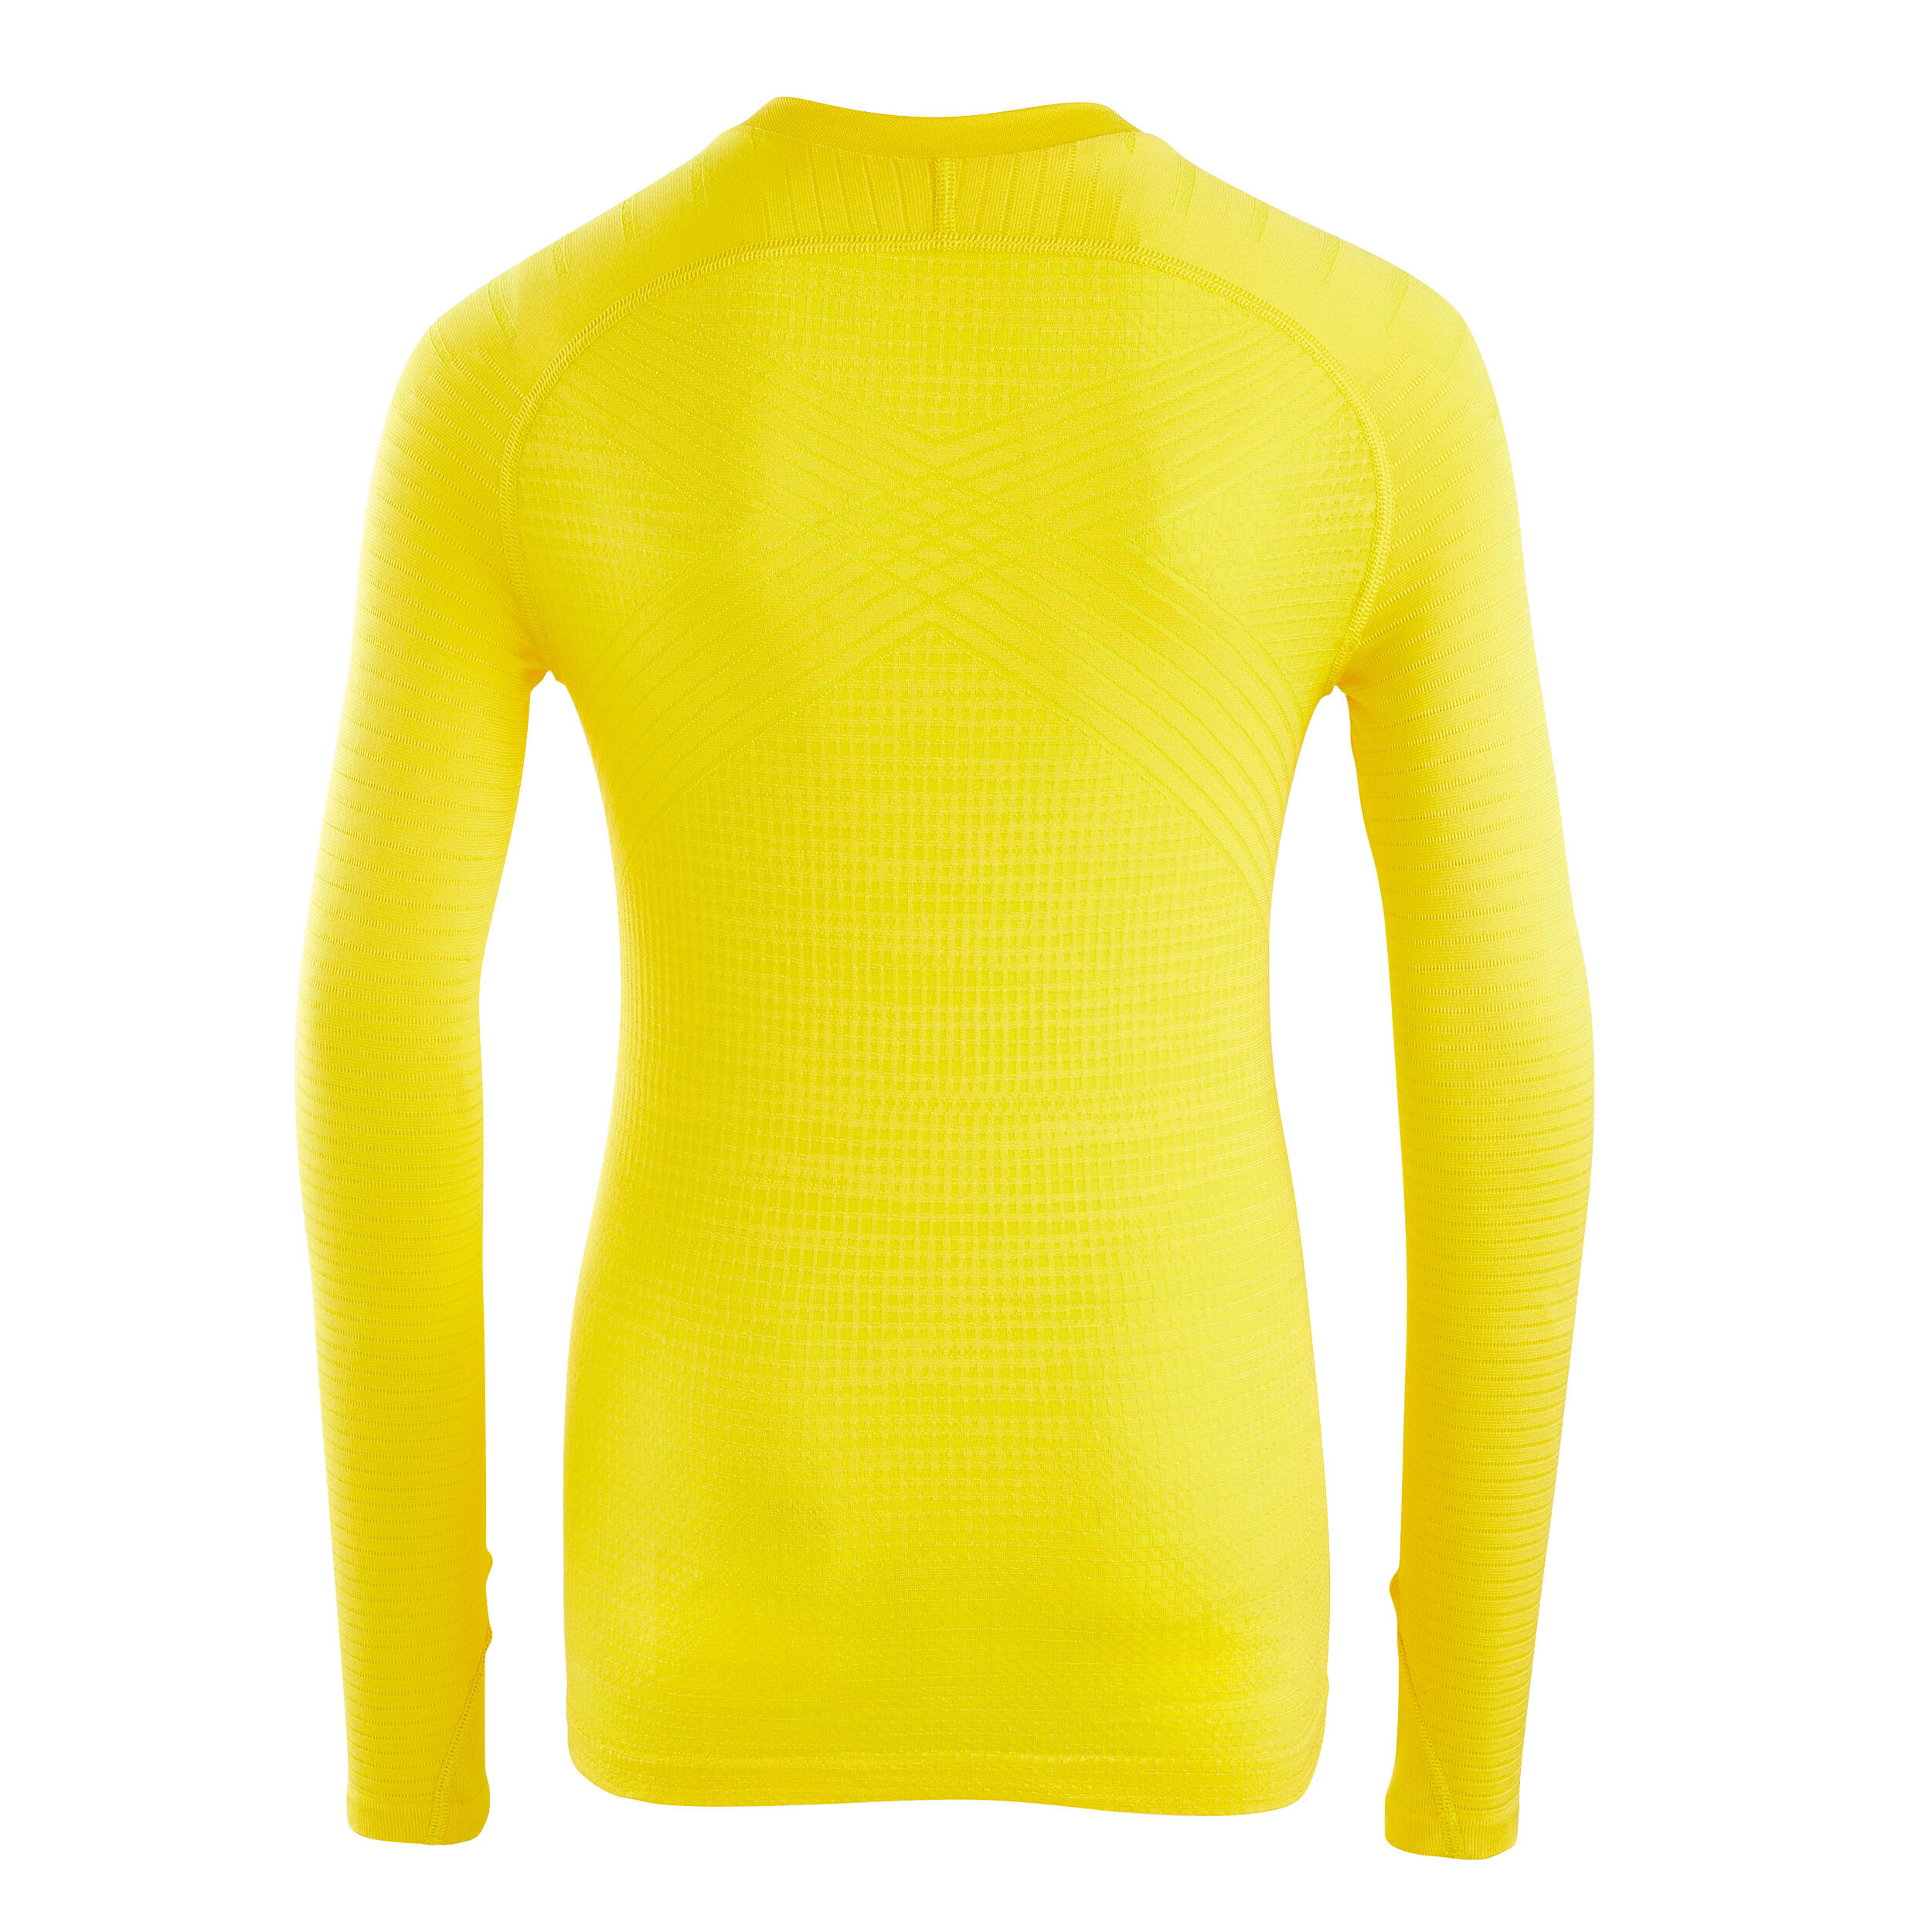 Kids' Long-Sleeved Thermal Base Layer Top Keepdry 500 - Yellow 3/9